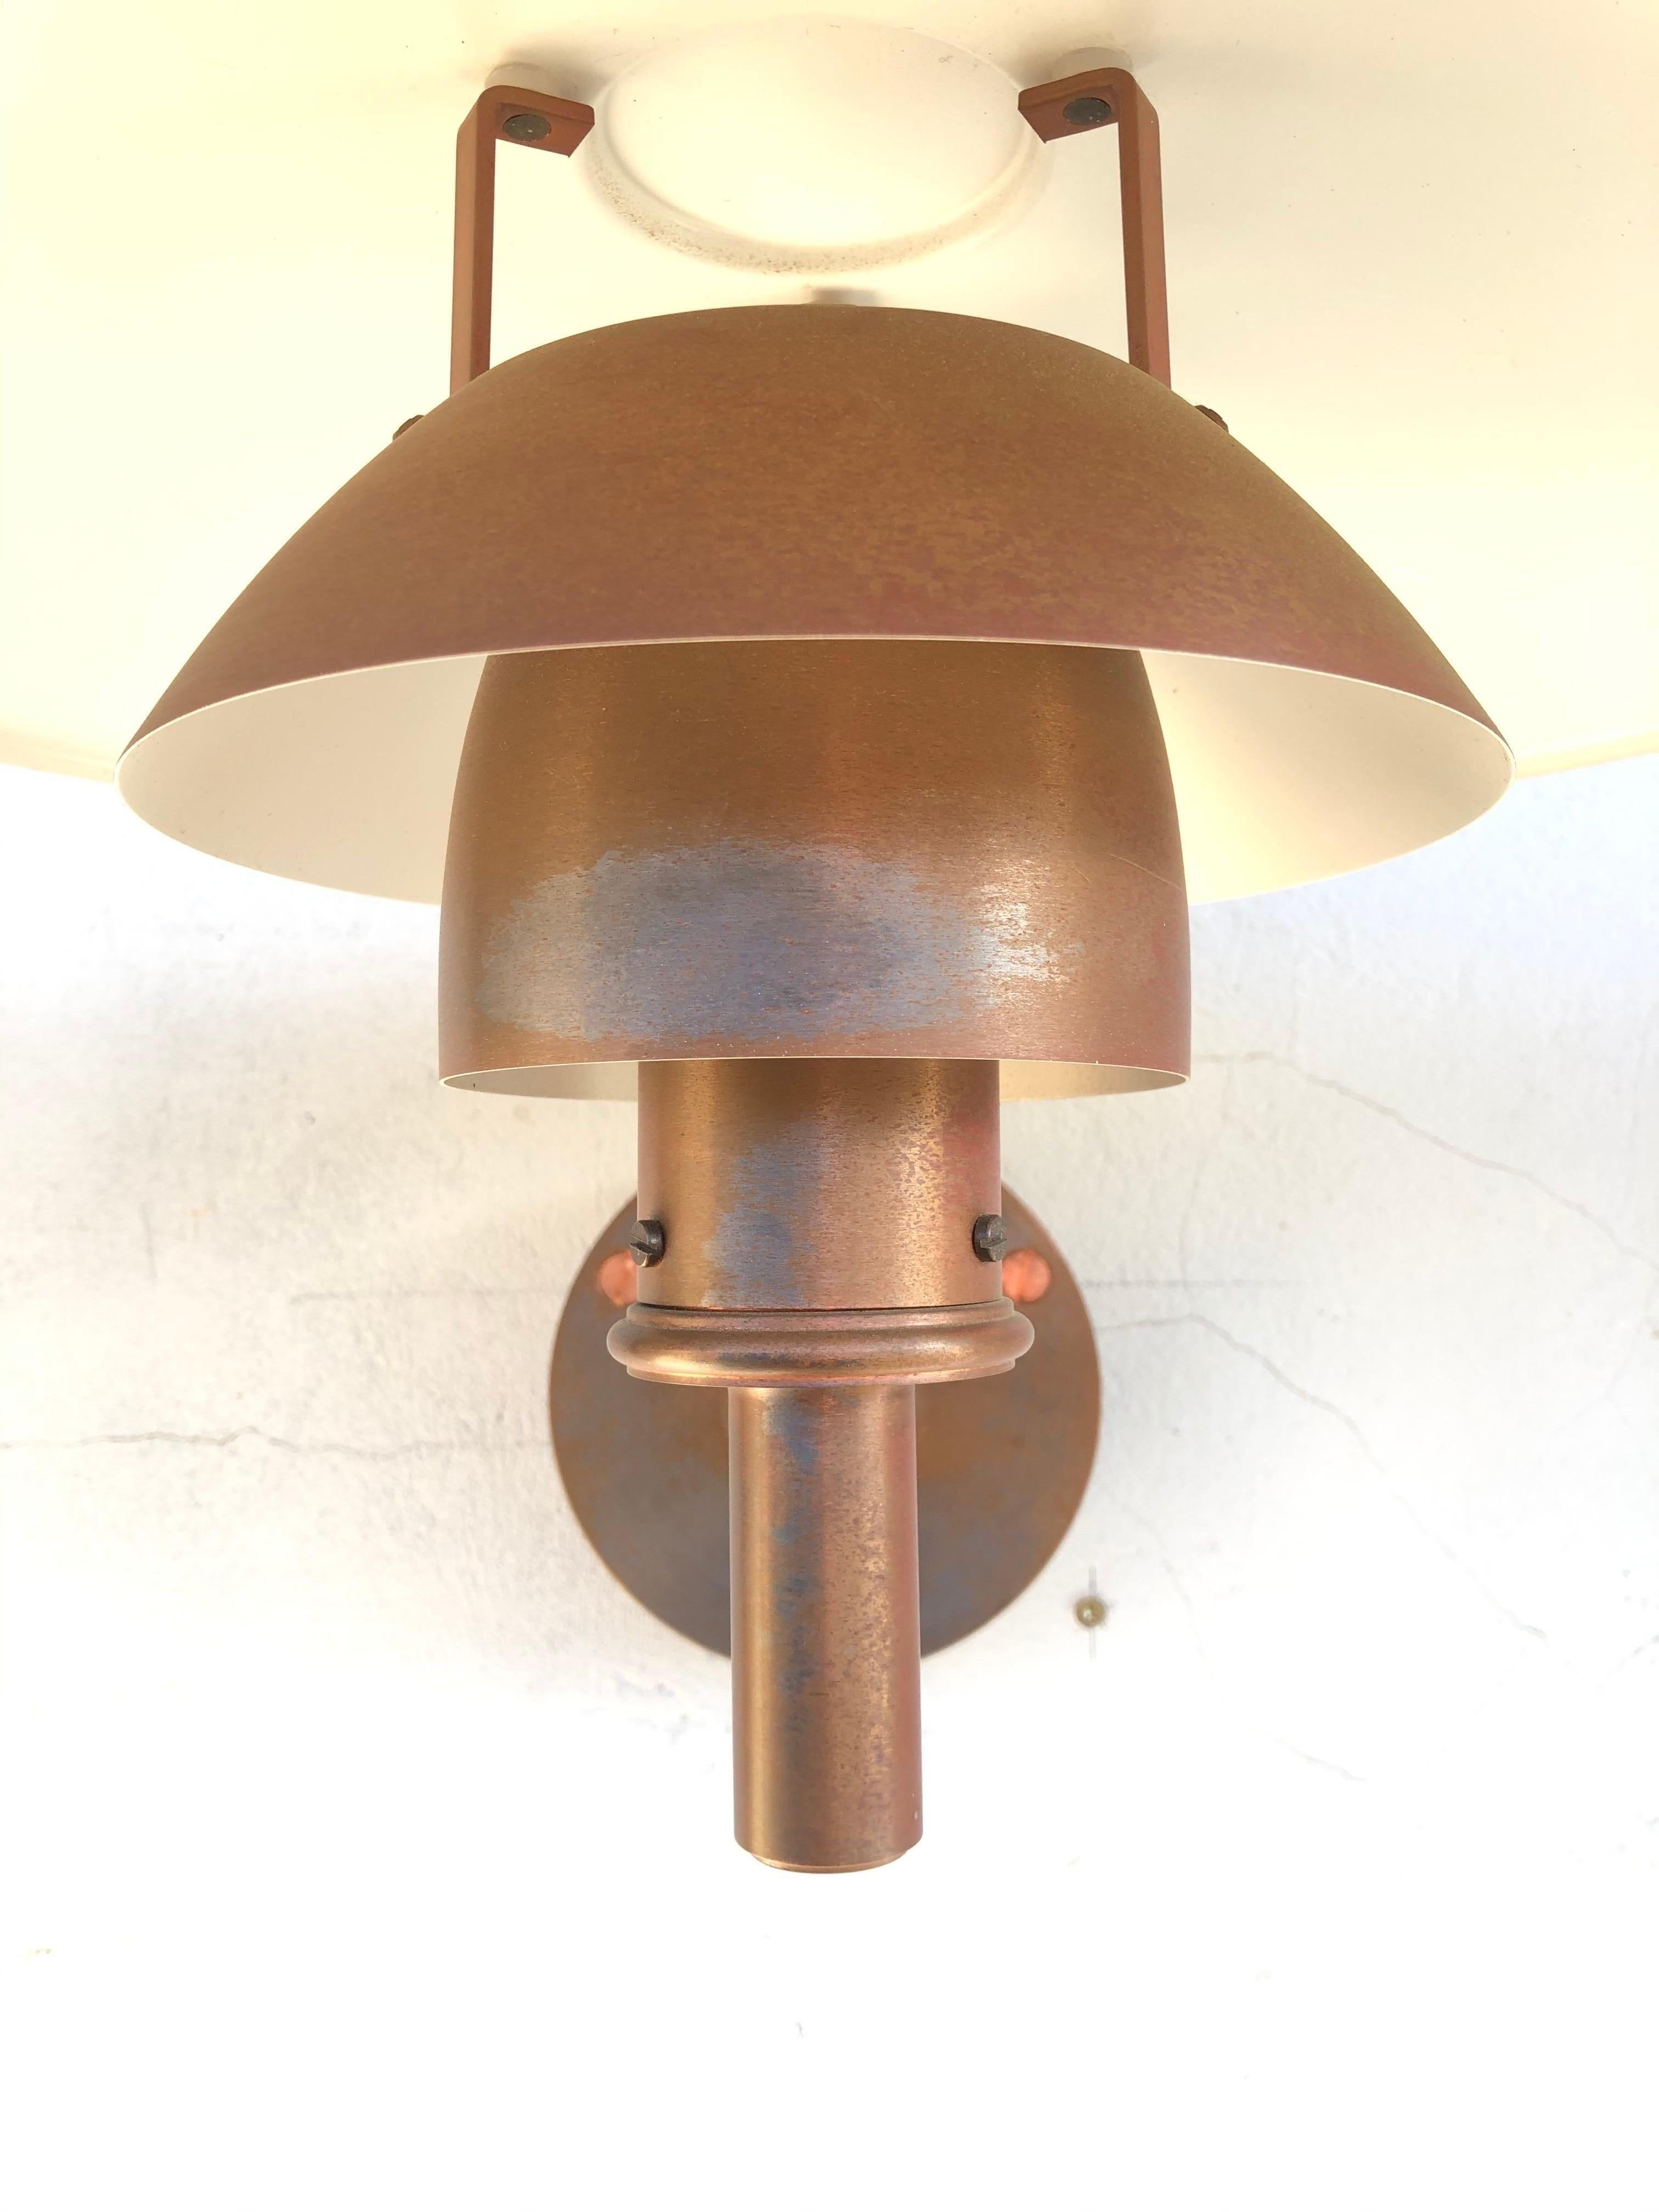 Pair of Iconic Poul Henningsen Copper Wall Lamps by Louis Poulsen of DK 1